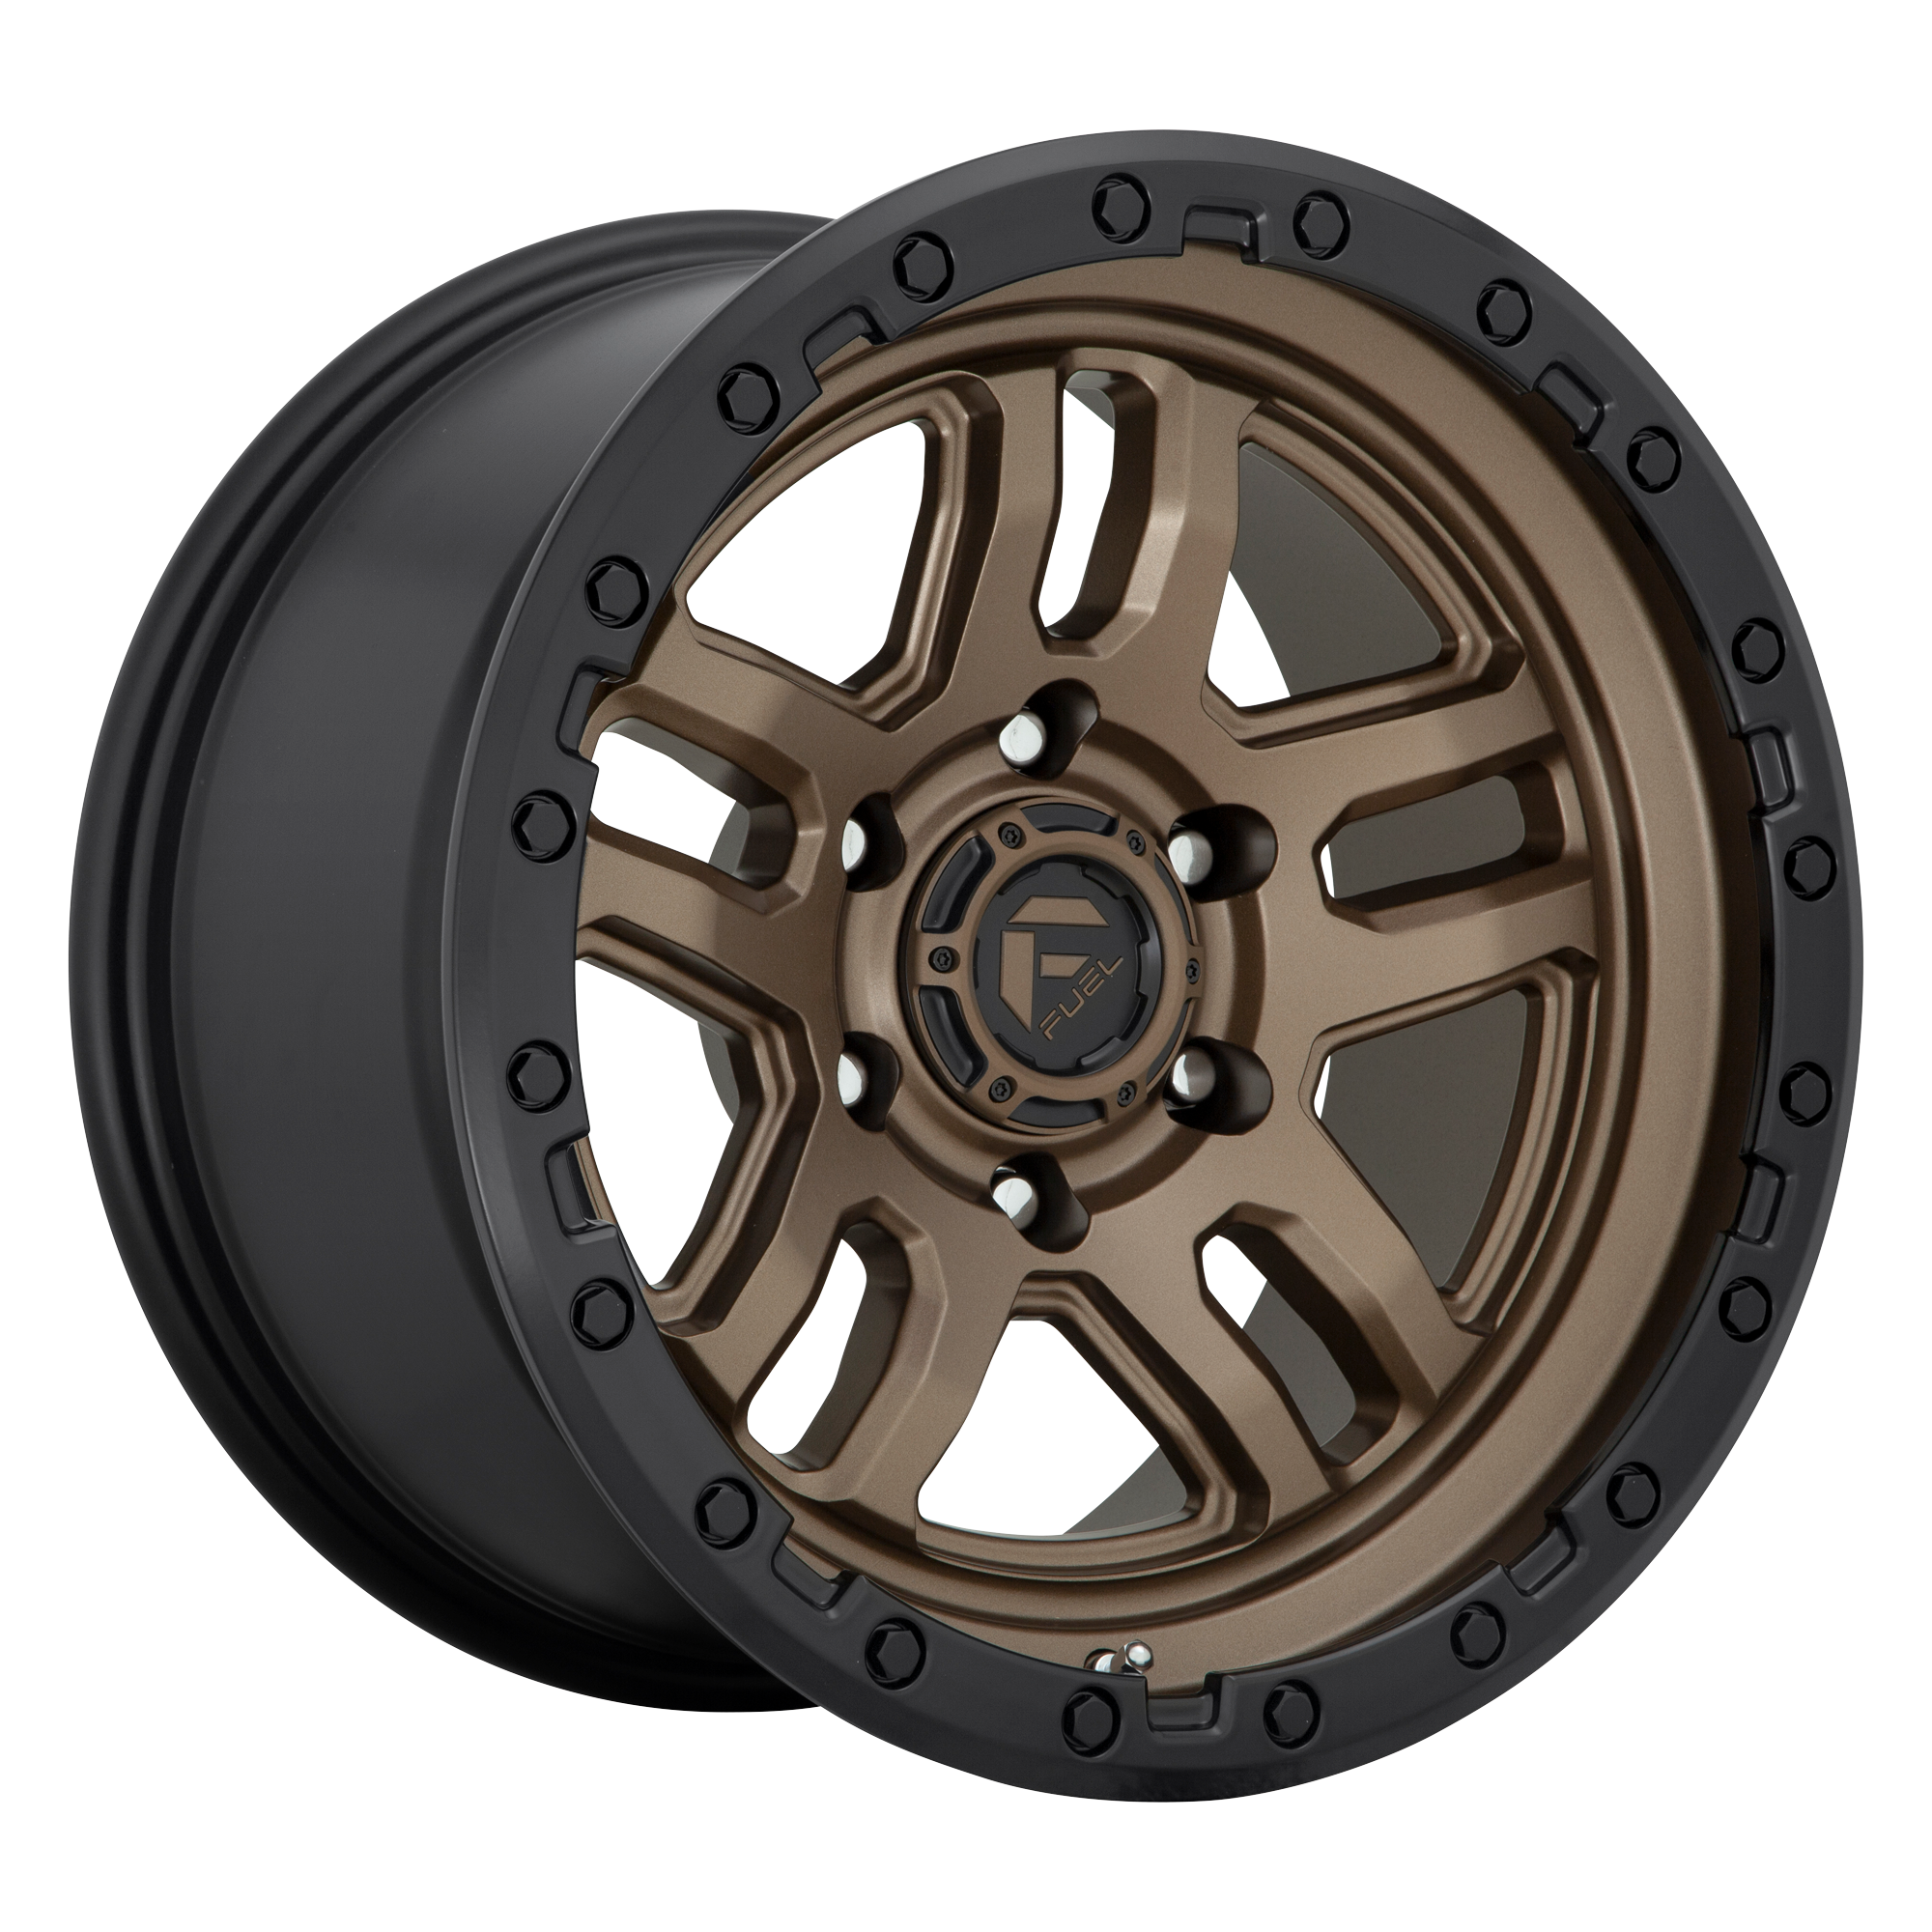 AMMO 17x9 6x135.00 MATTE BRONZE BLACK BEAD RING (-12 mm) - Tires and Engine Performance